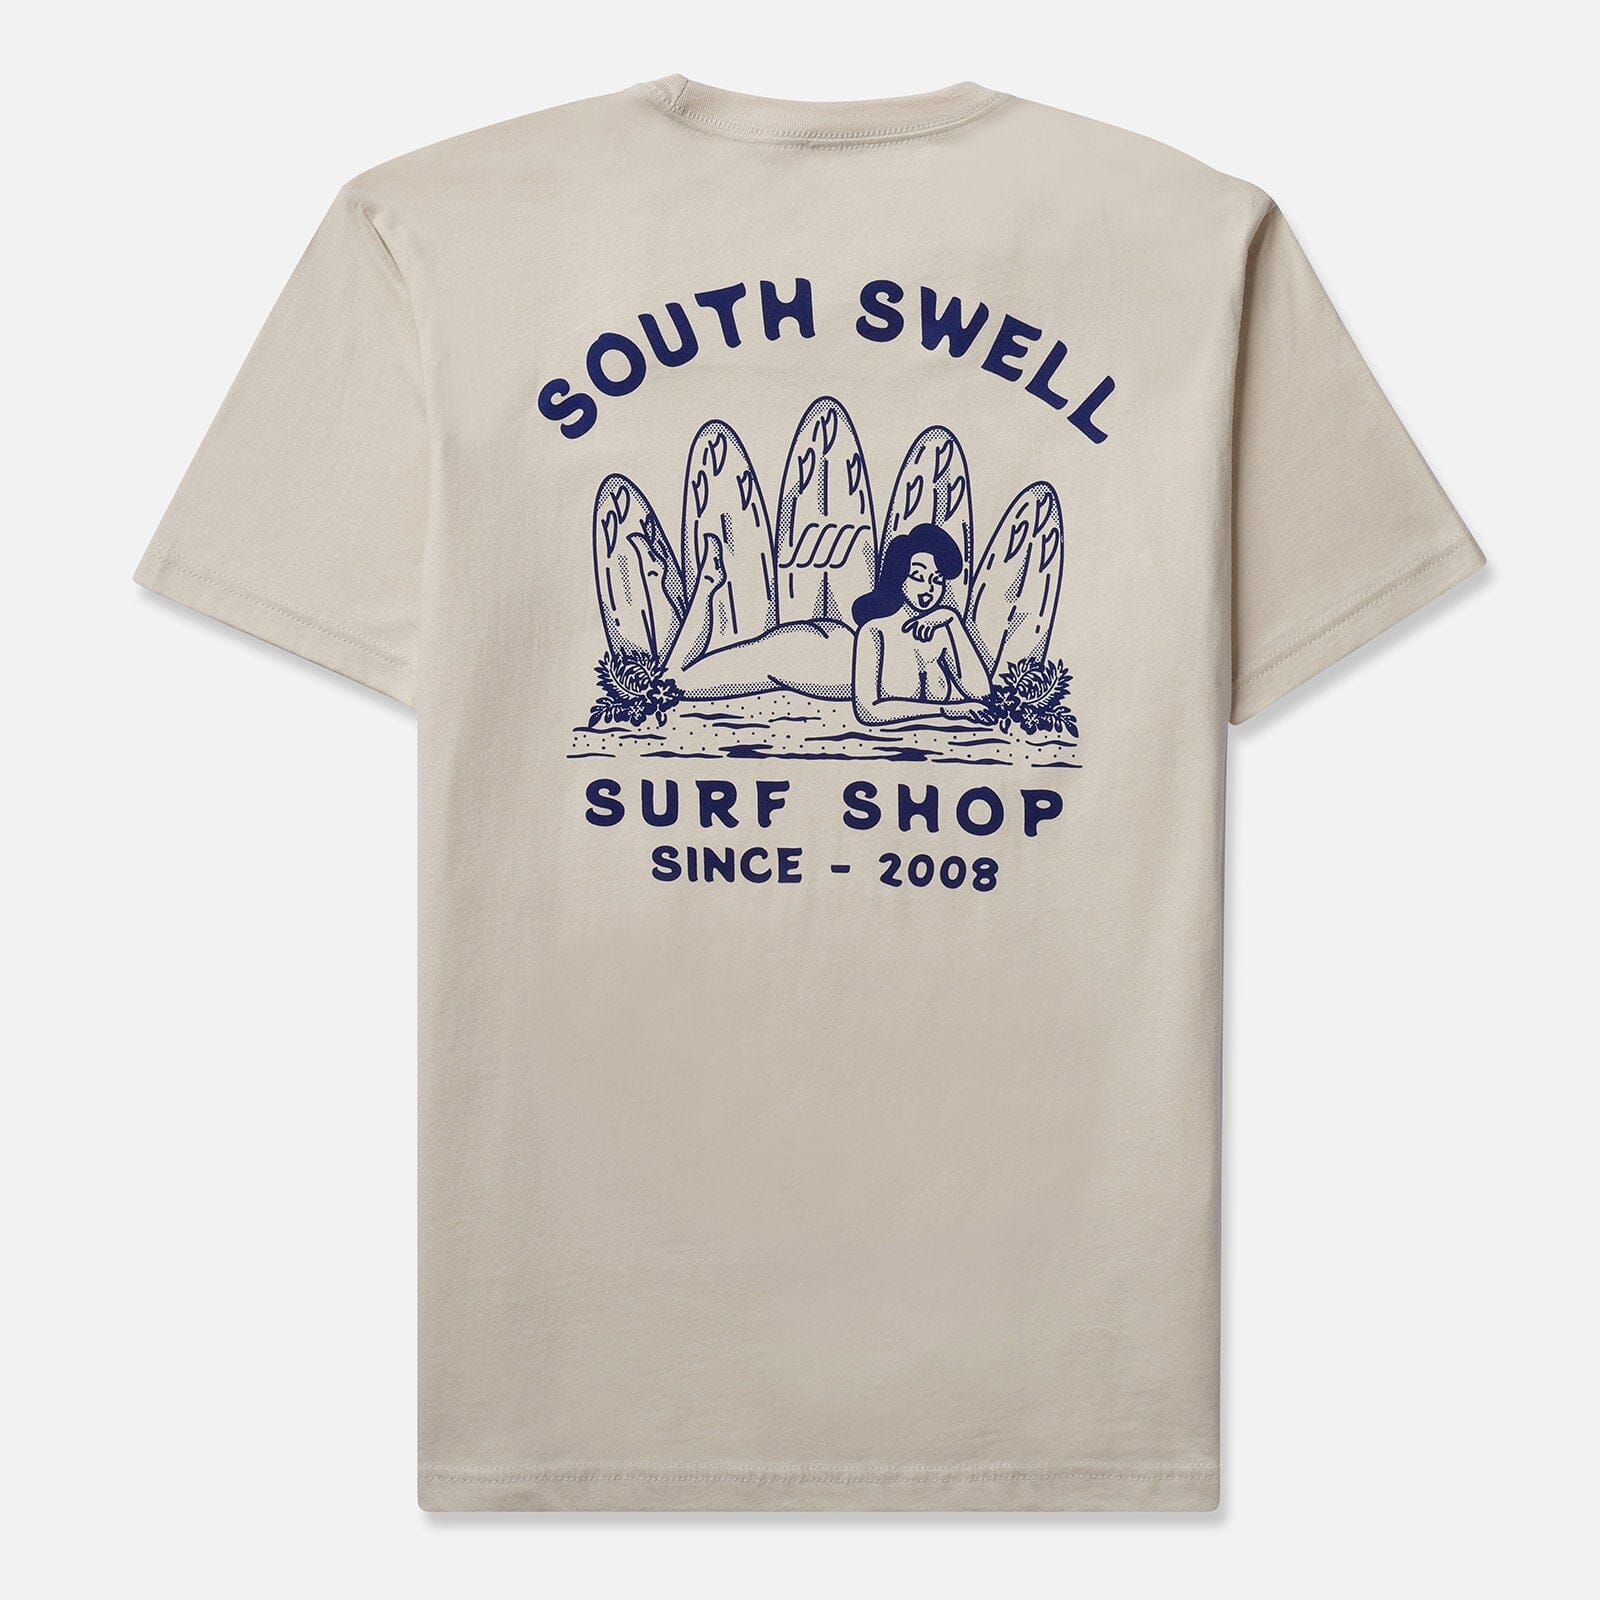 South Swell No Tan Lines Tee SOUTH SWELL 